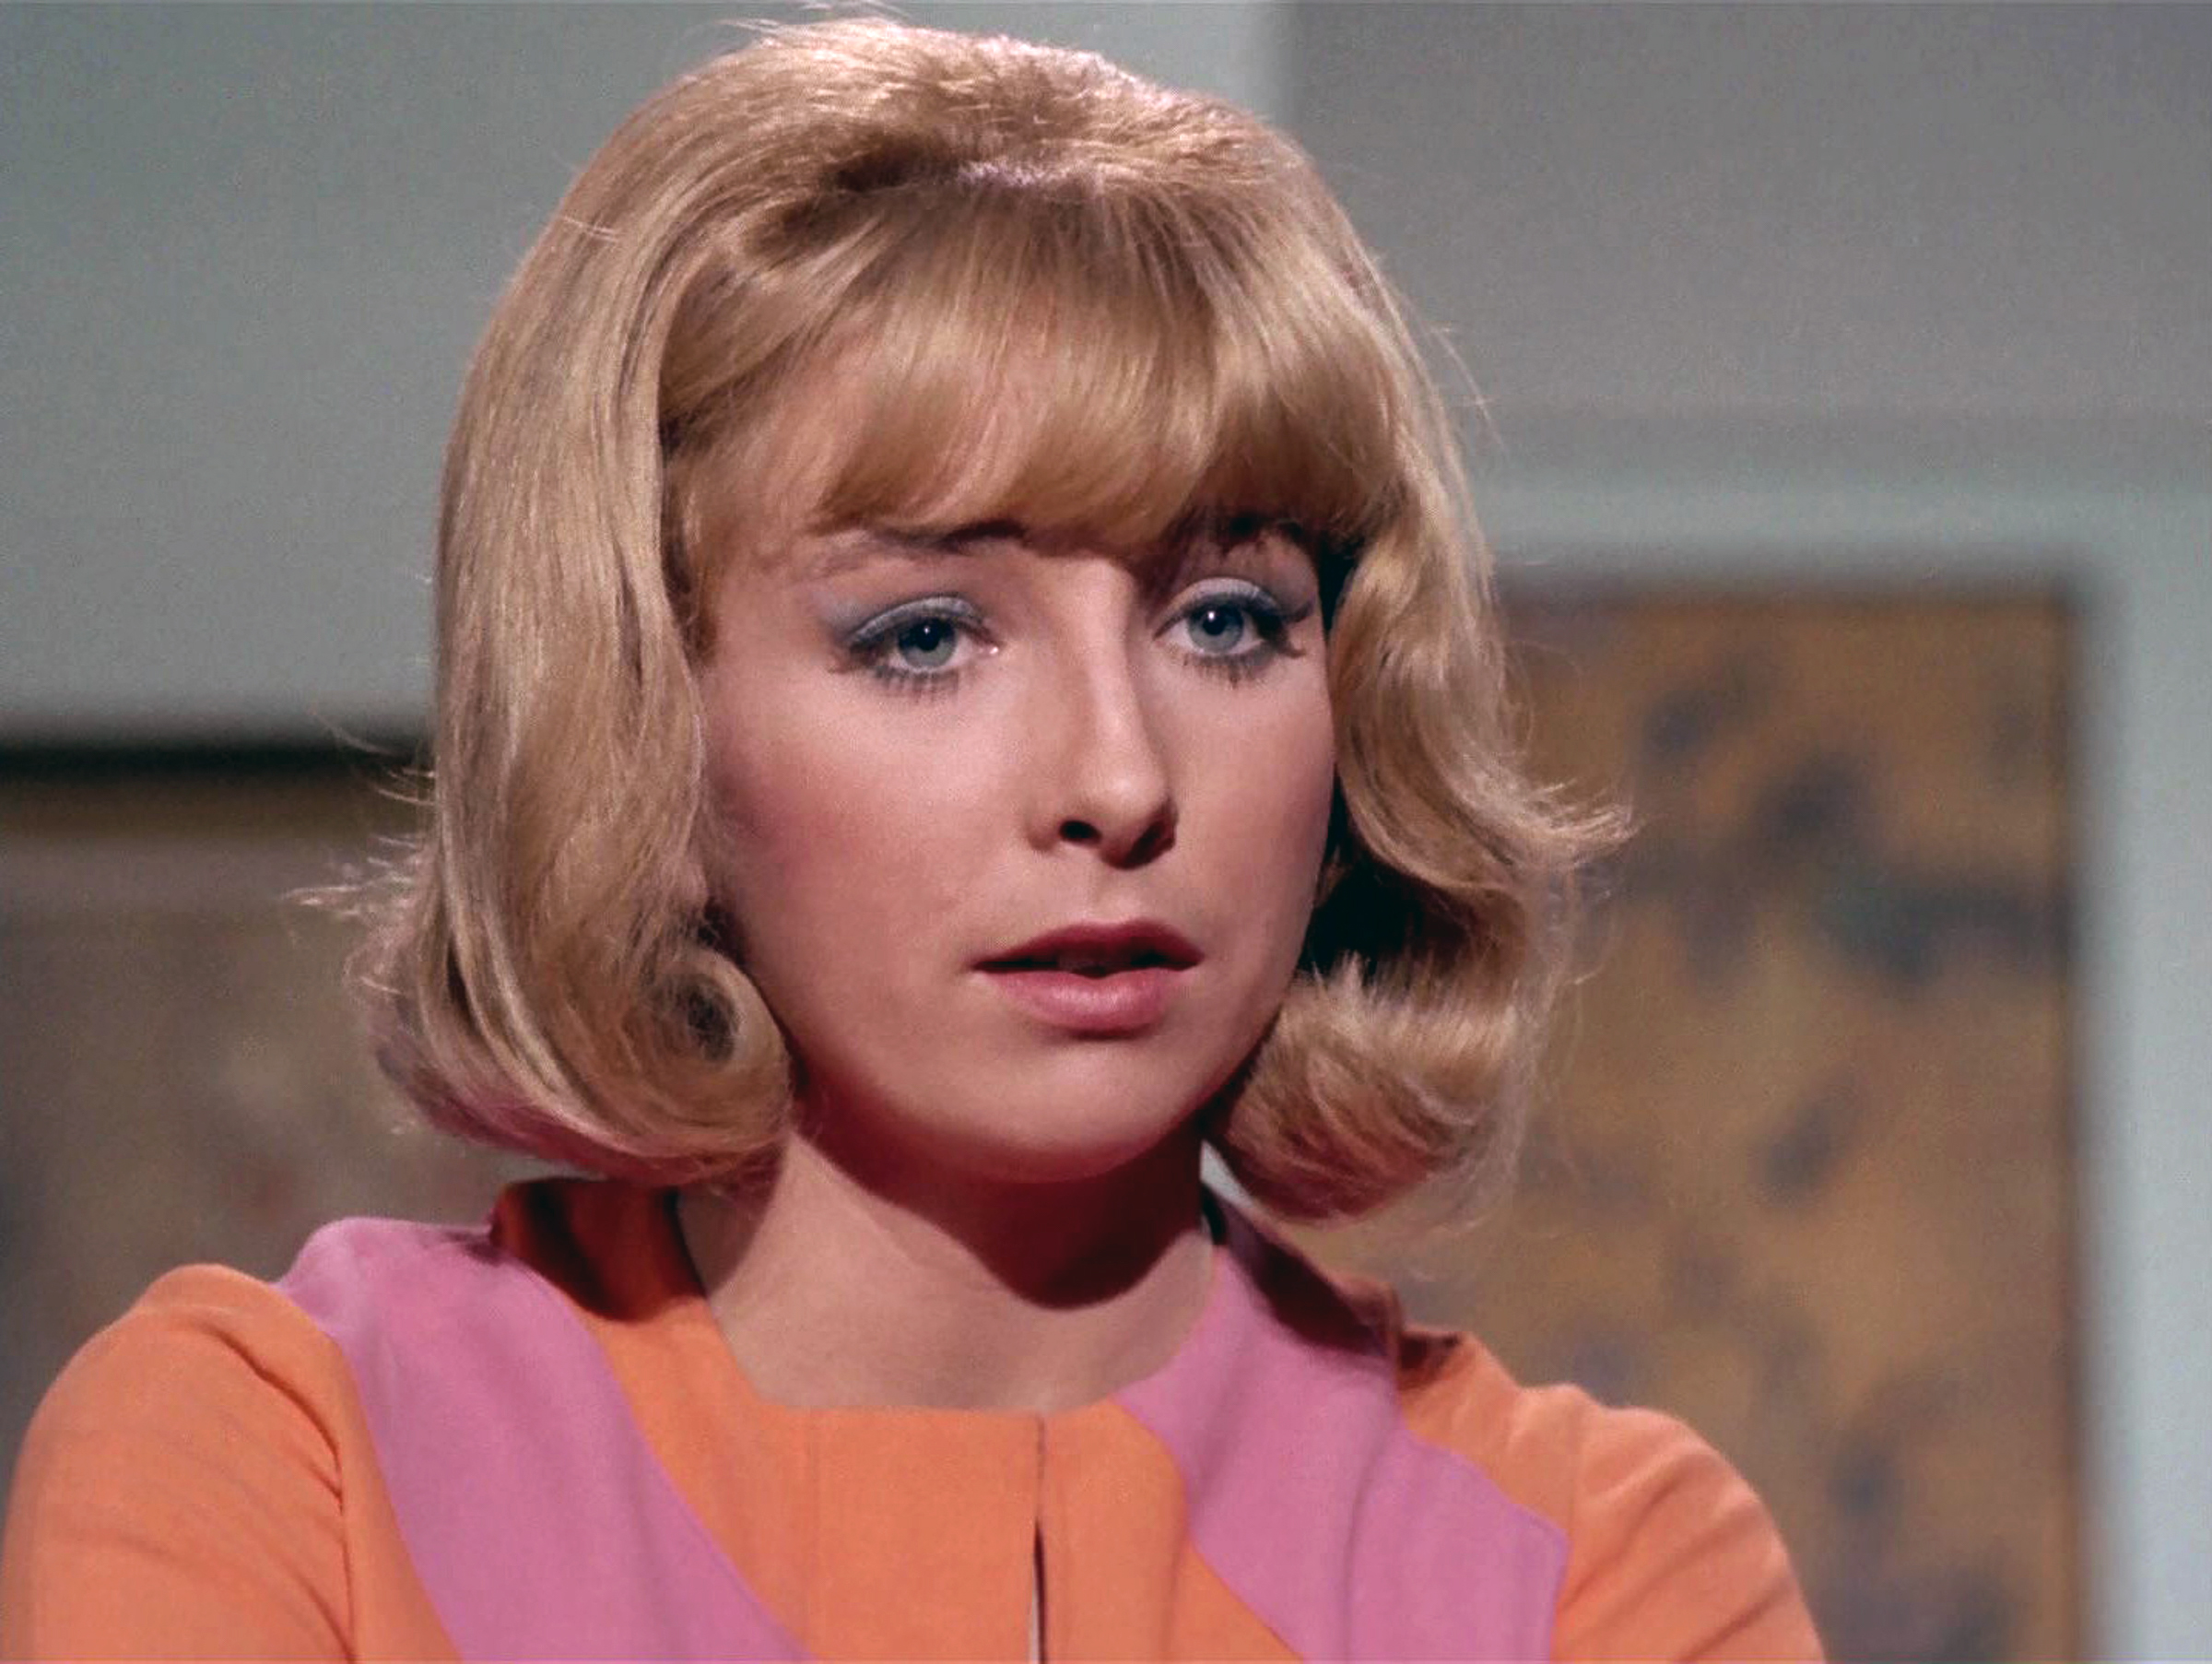 Teri Garr as Roberta Lincoln in the "Star Trek: The Original Series" episode, "Assignment: Earth." Season 2, episode 26, whose original air date was March 29, 1968. | Source: Getty Images